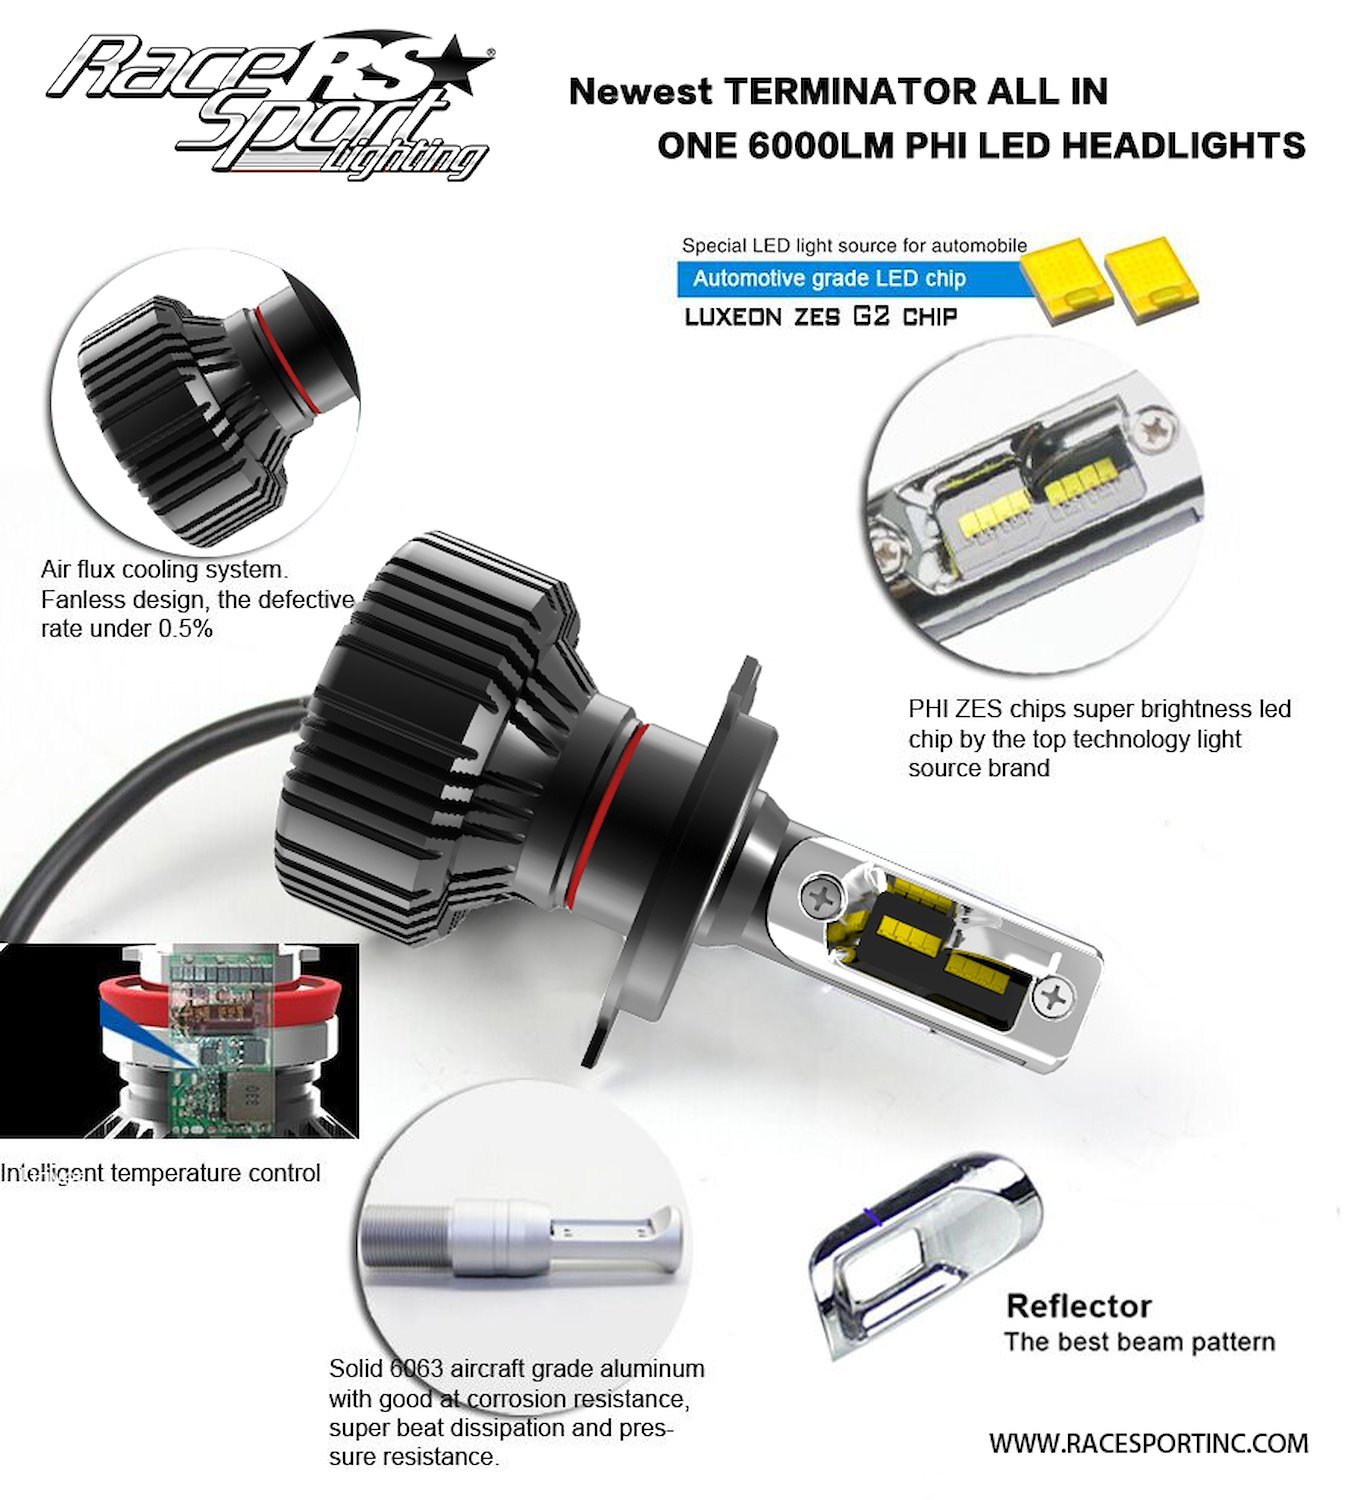 H7TLED Terminator-Series H7 Fan-less LED Conversion HeadLight Kit, w/ Pin Point Projection Optical Aims & Shallow Mount Design